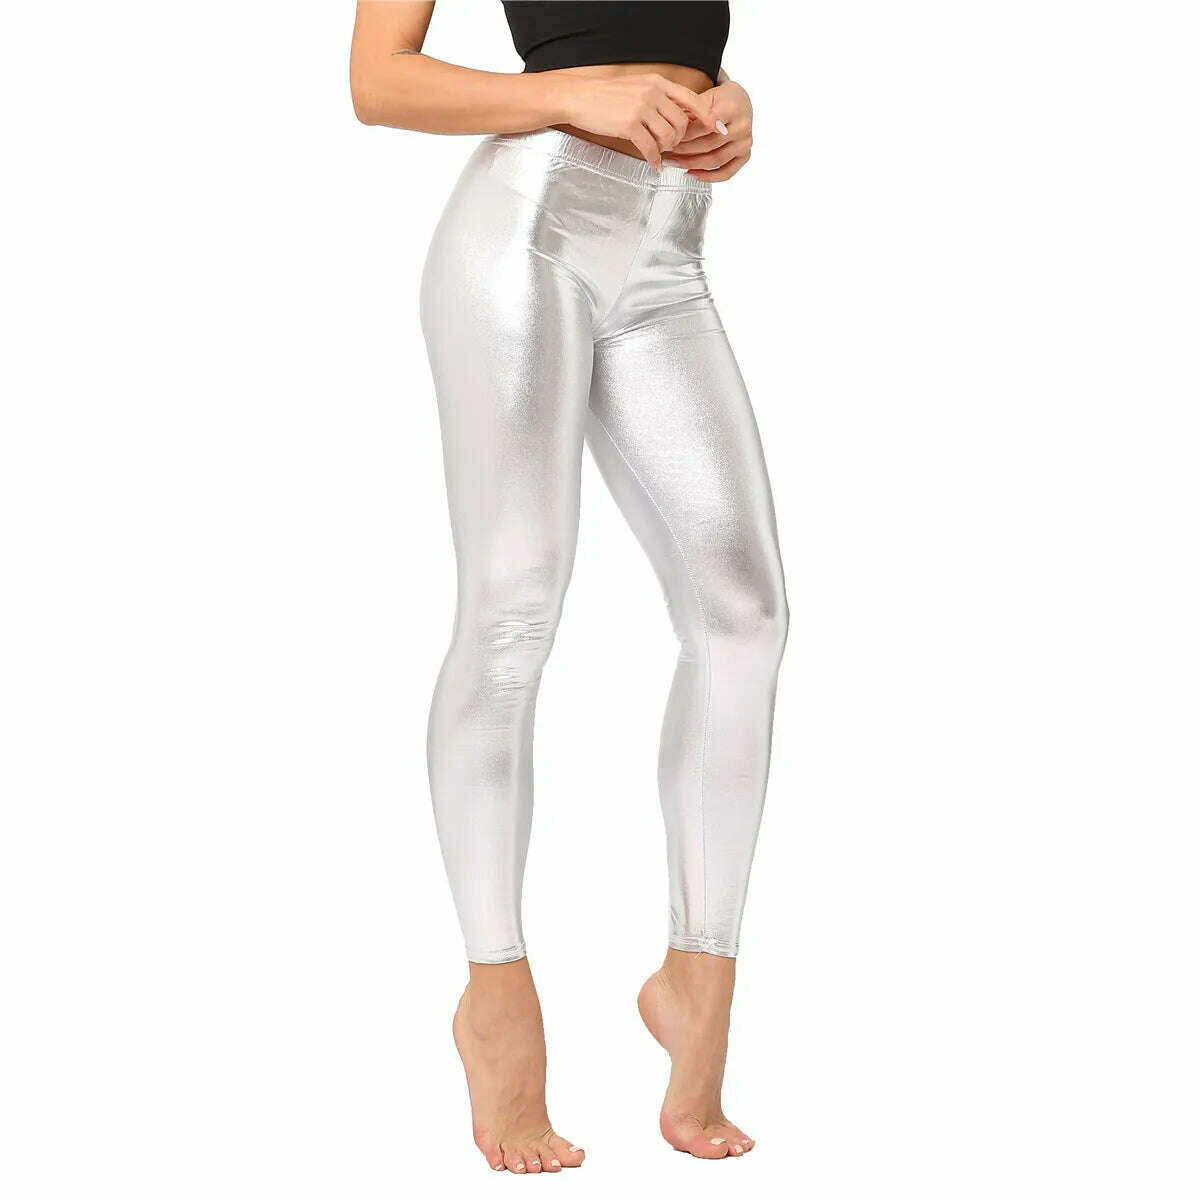 KIMLUD, Metallic Color PU Leggings Women Faux Leather Pants Dancing Party Pant Sexy Night Club Skinny Costume Pants Tight Trousers, Silver / One size 50kg below, KIMLUD Women's Clothes